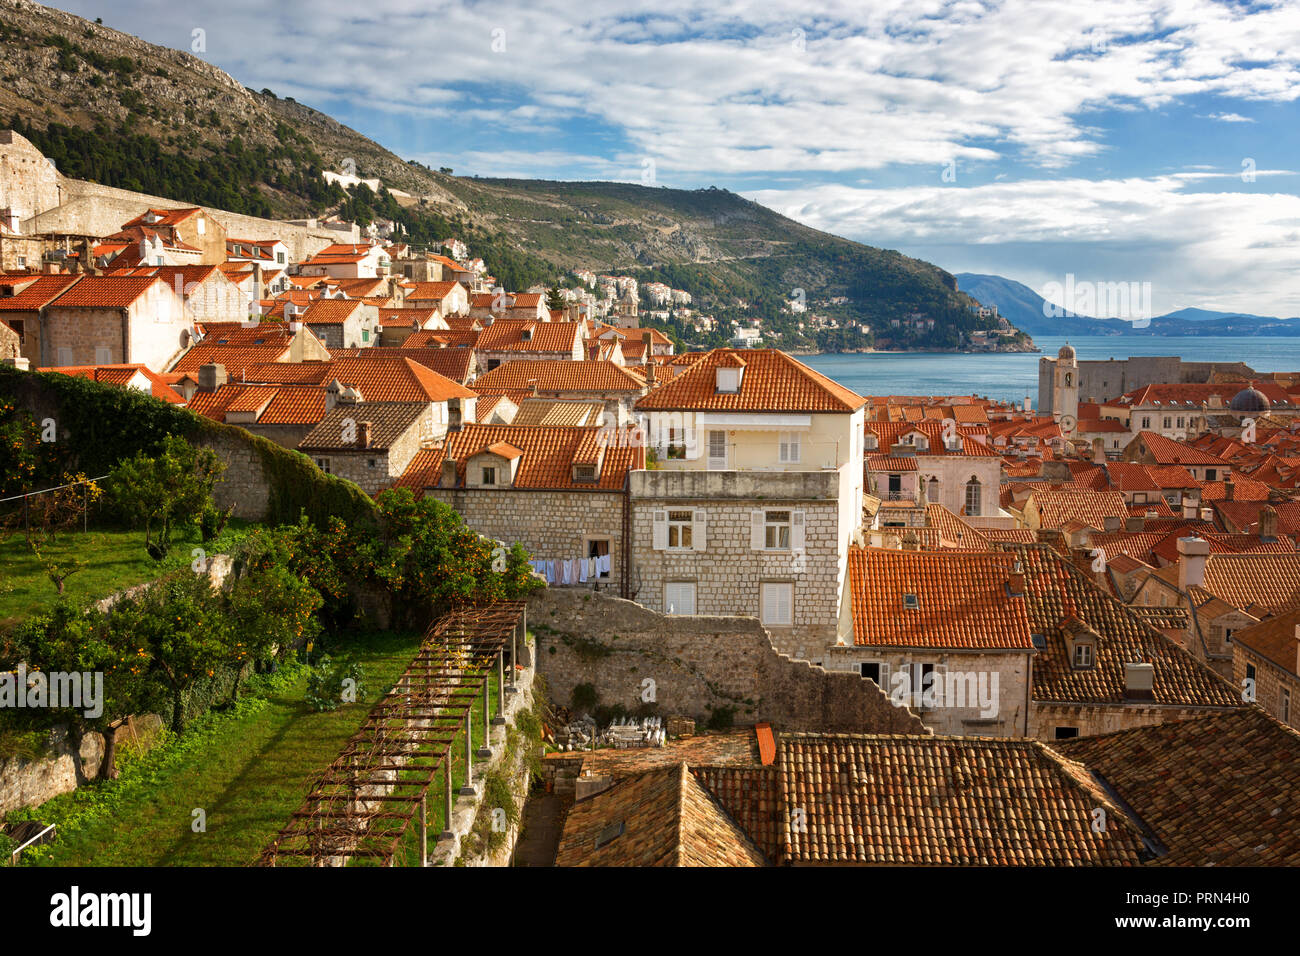 View of the old town, Dubrovnik, Croatia Stock Photo